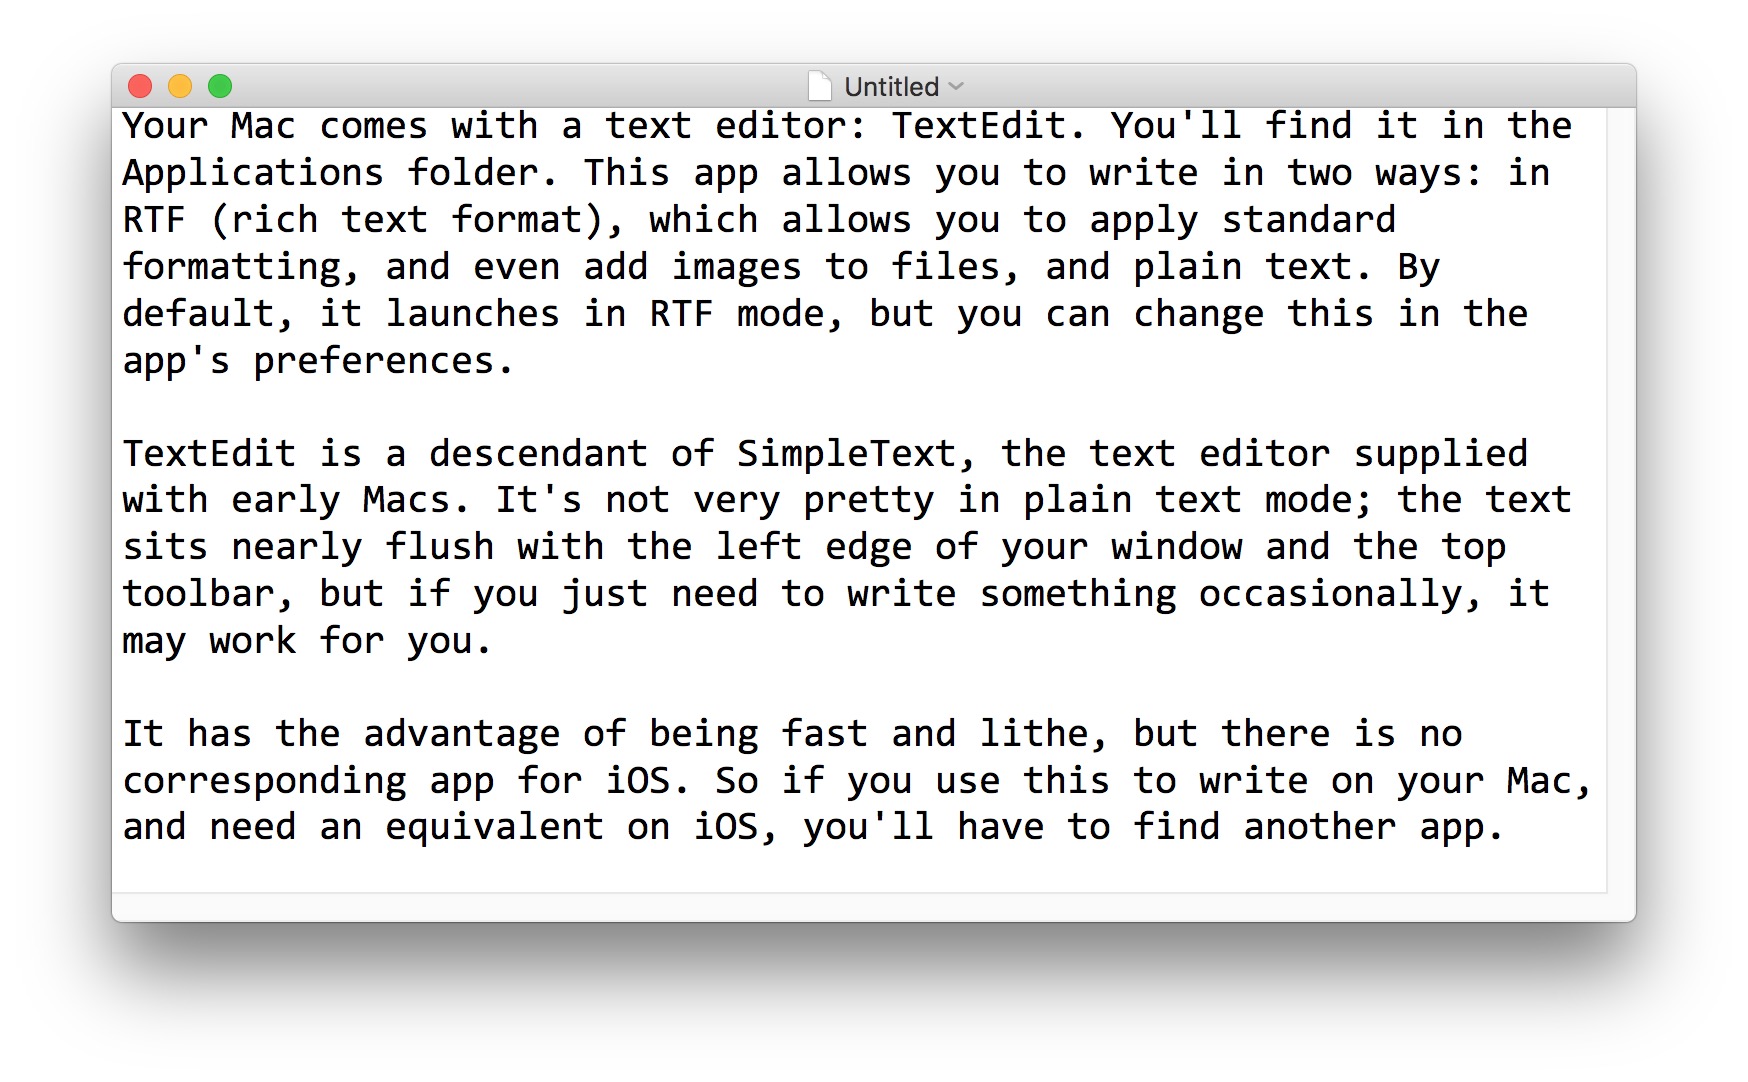 Text Editor Definition - What is a text editor?